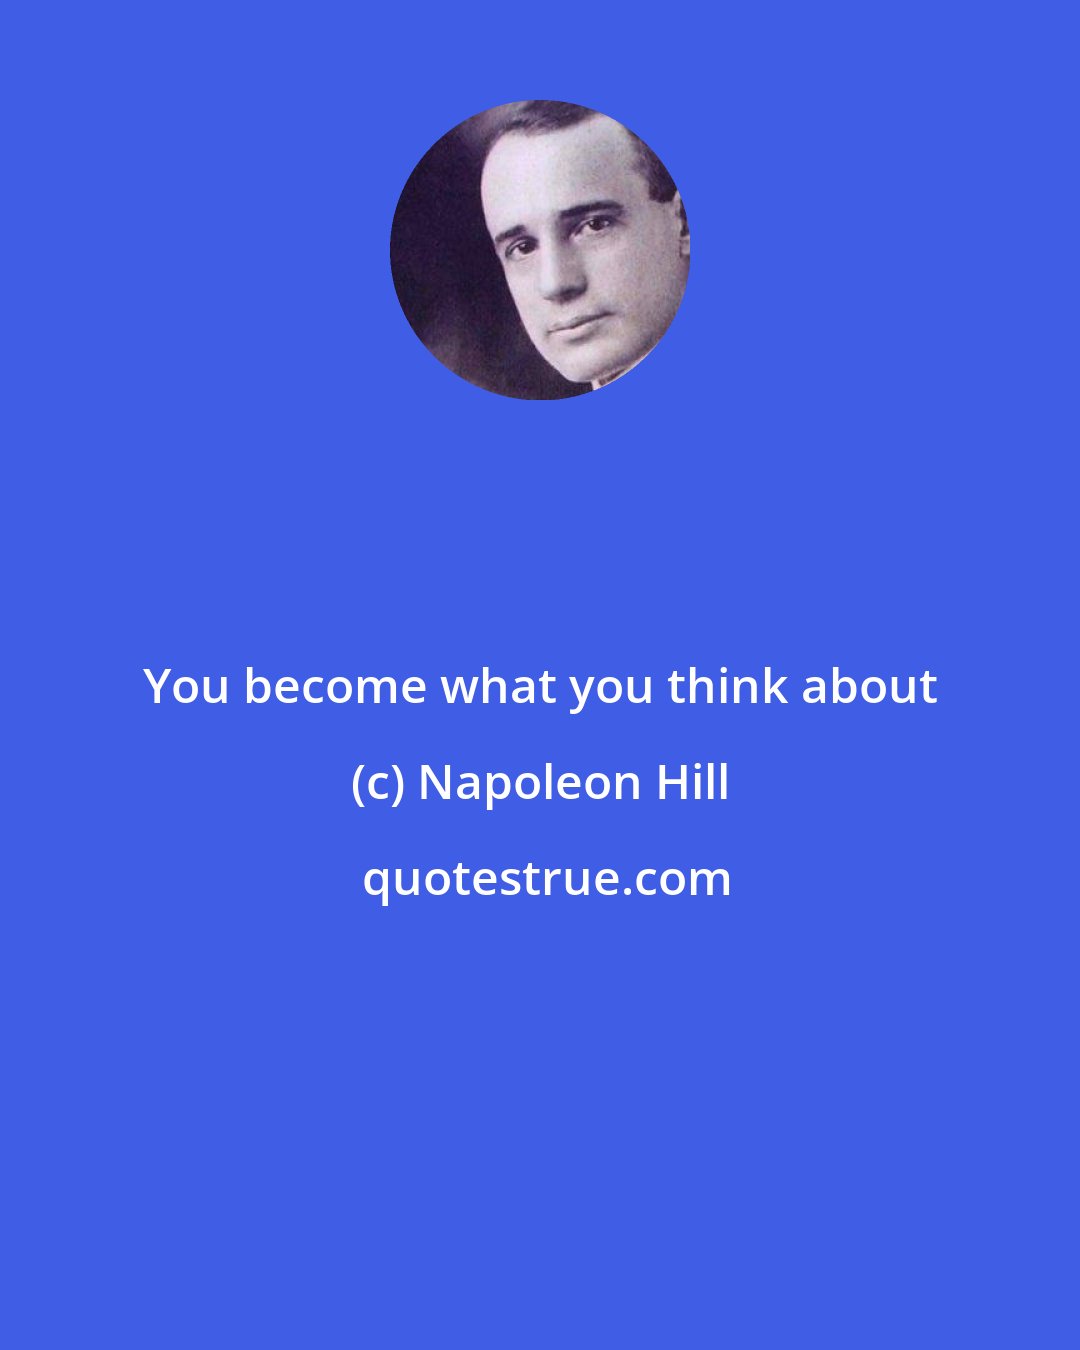 Napoleon Hill: You become what you think about